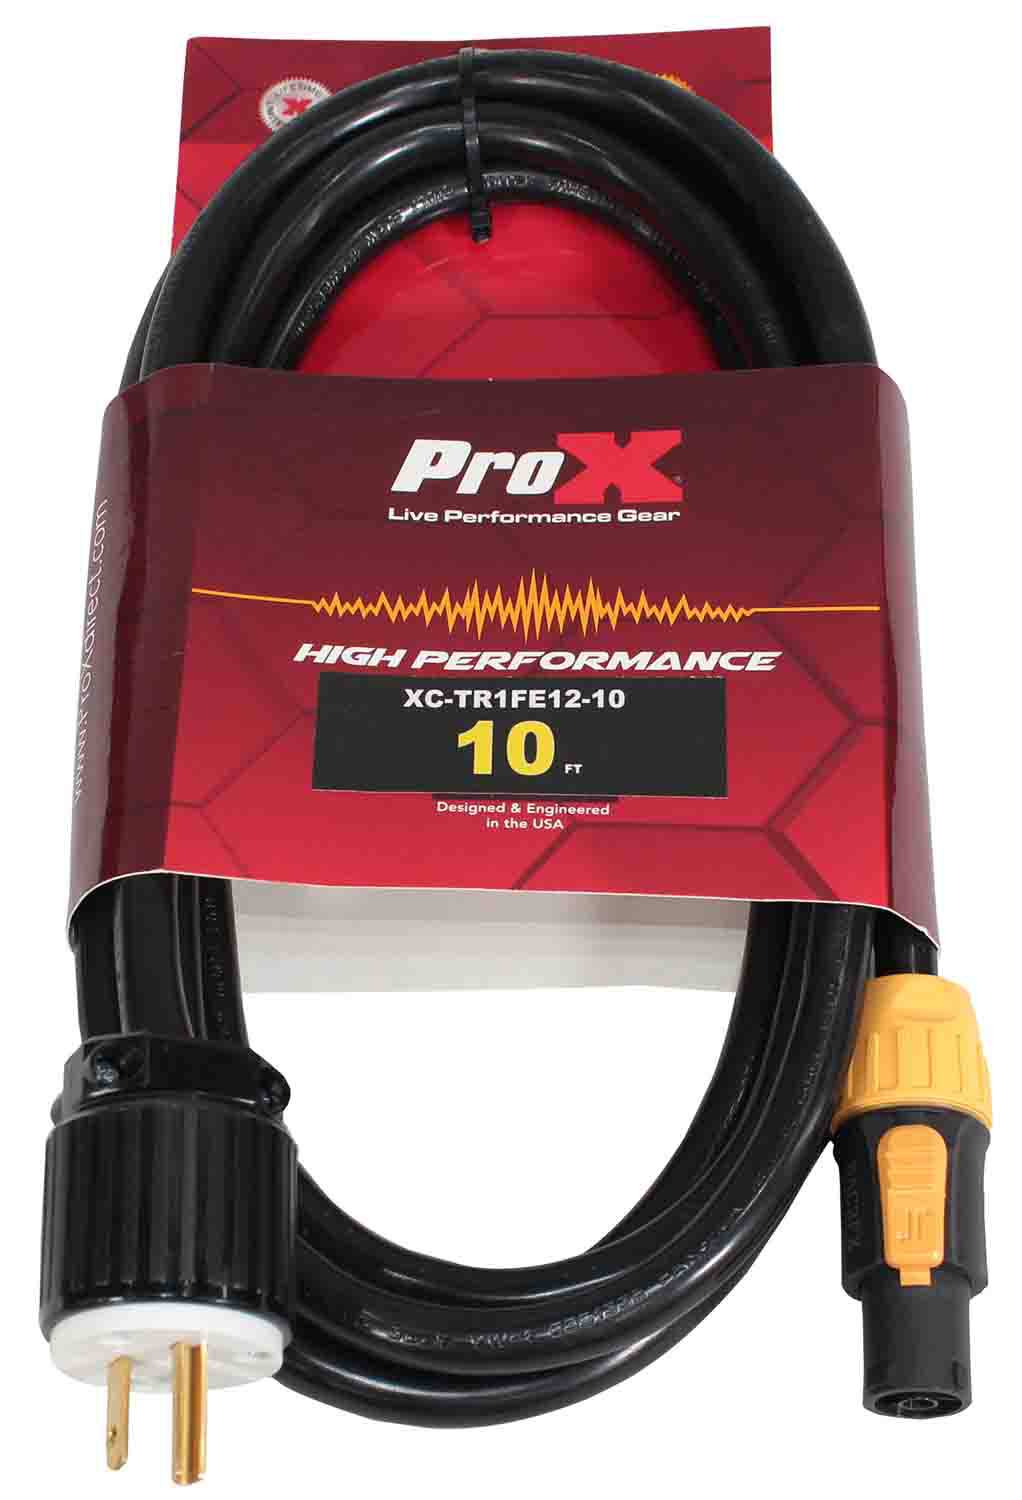 ProX XC-TR1FE12-10, 12AWG 120VAC Male Edison NEMA 5-15P to Male Cable for Powercon Compatbile Devices - 10 Feet - Hollywood DJ